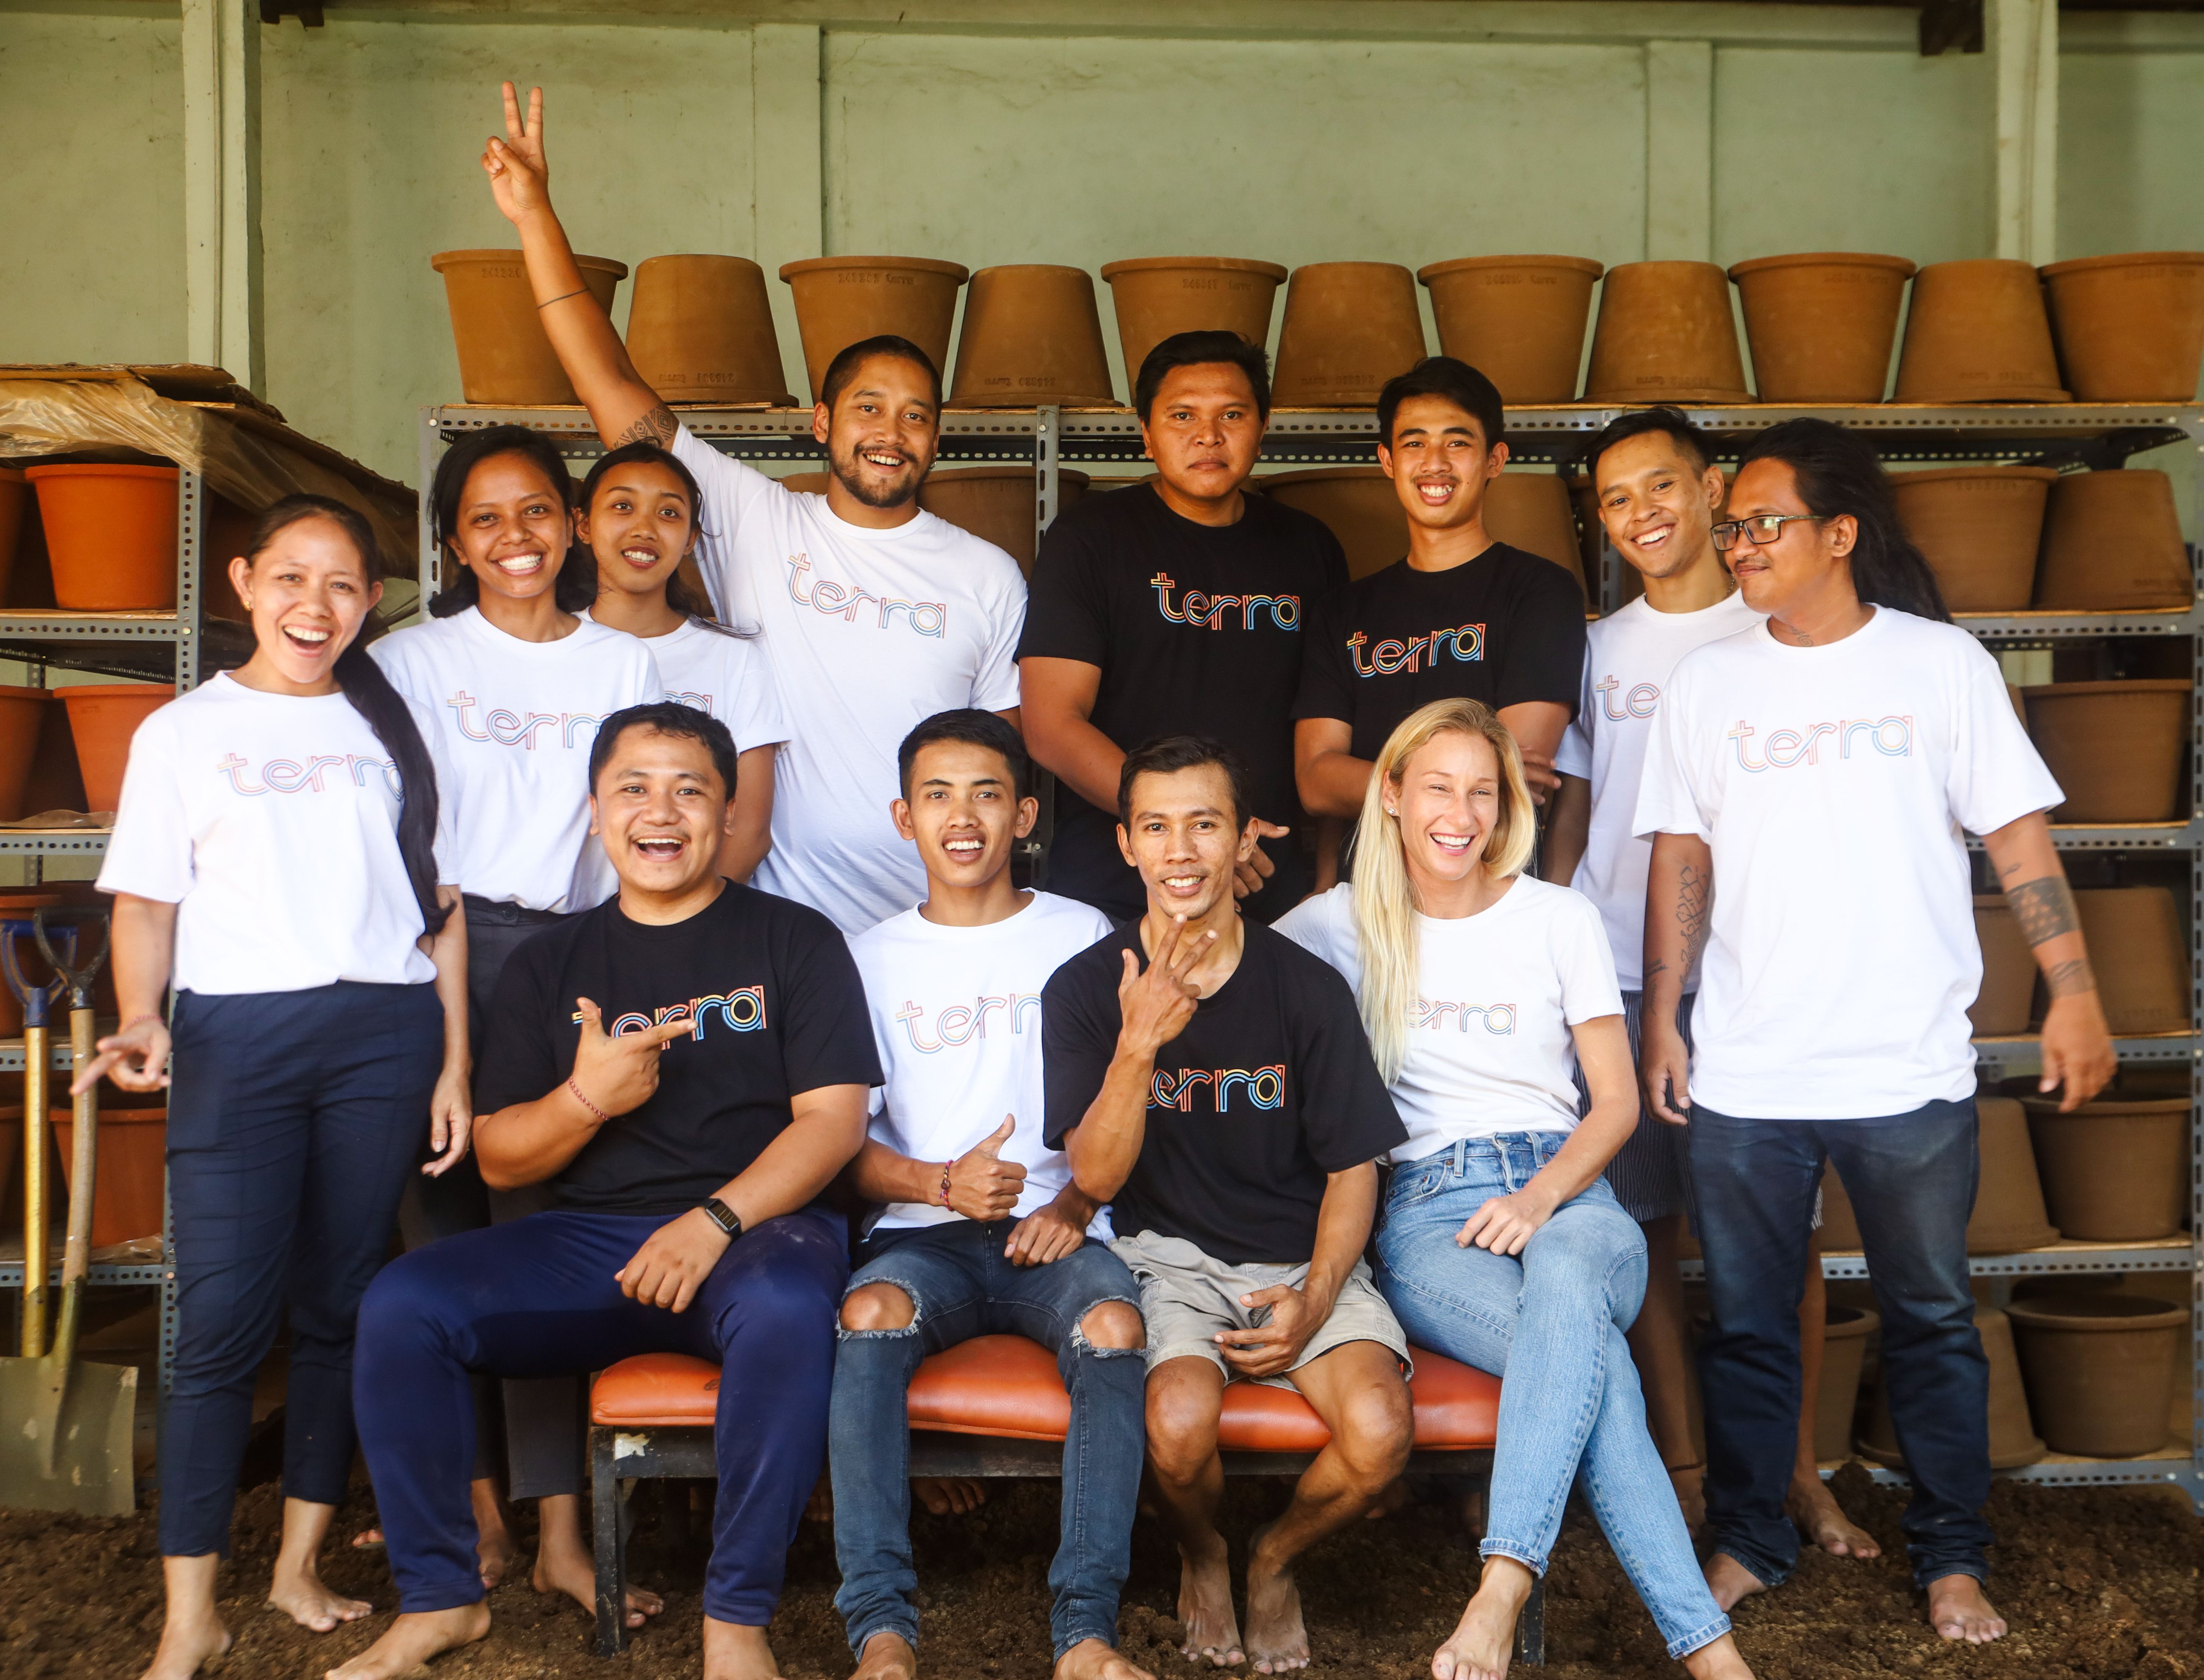 Terra Water has been operating in Indonesia for 2.5 years, offering ceramic water filters and a range of complementary products made from locally sourced, all-natural ingredients.